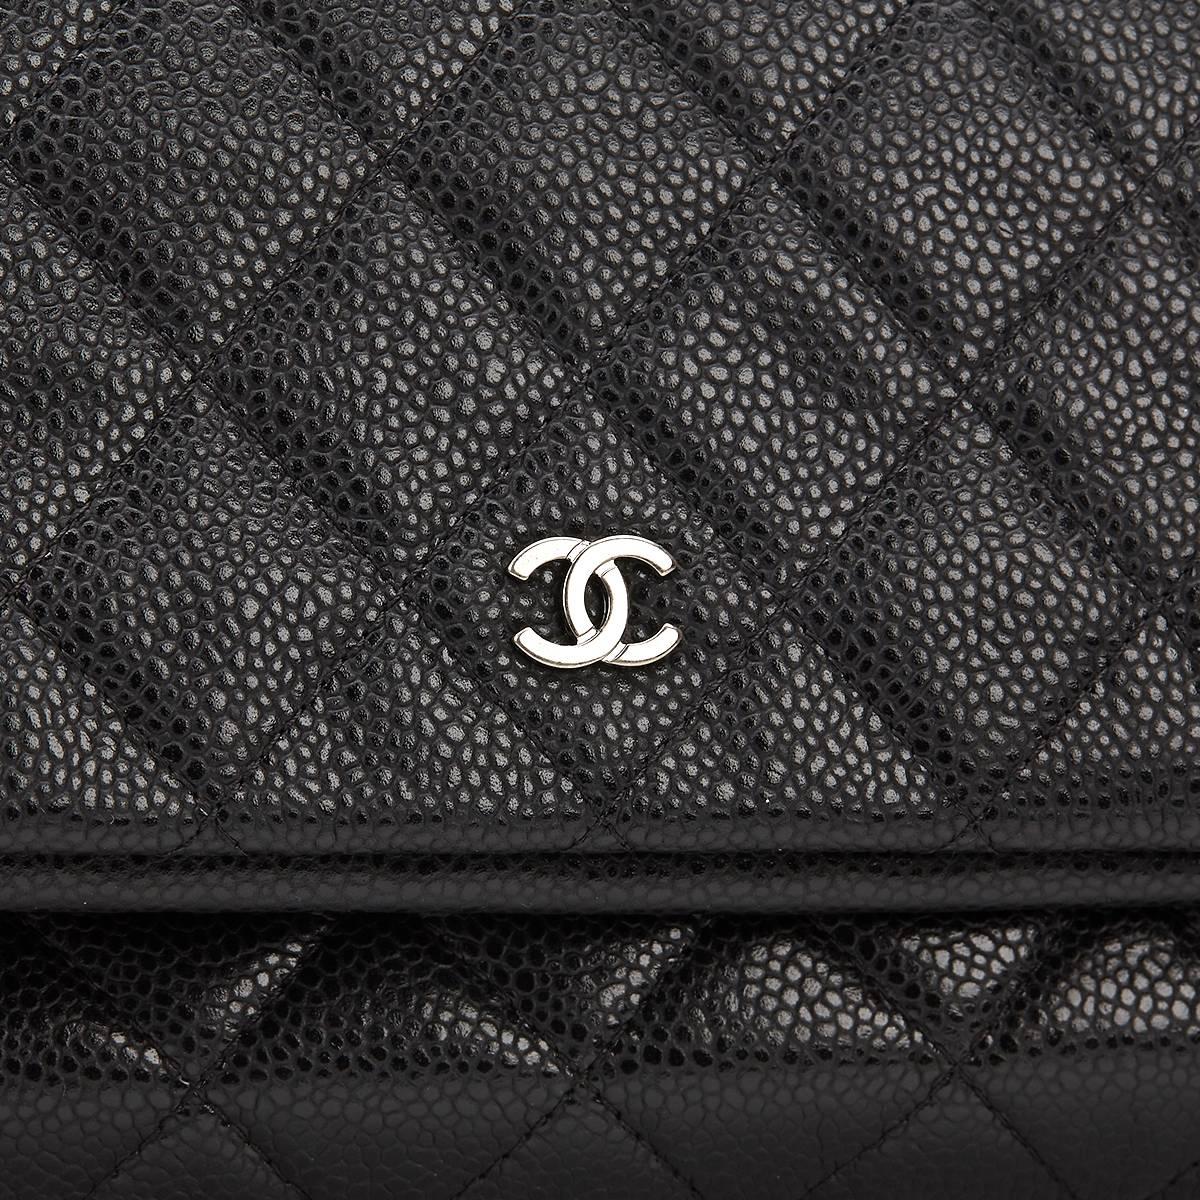 2015 Chanel Black Quilted Caviar Leather Beauty CC Foldover Clutch 1